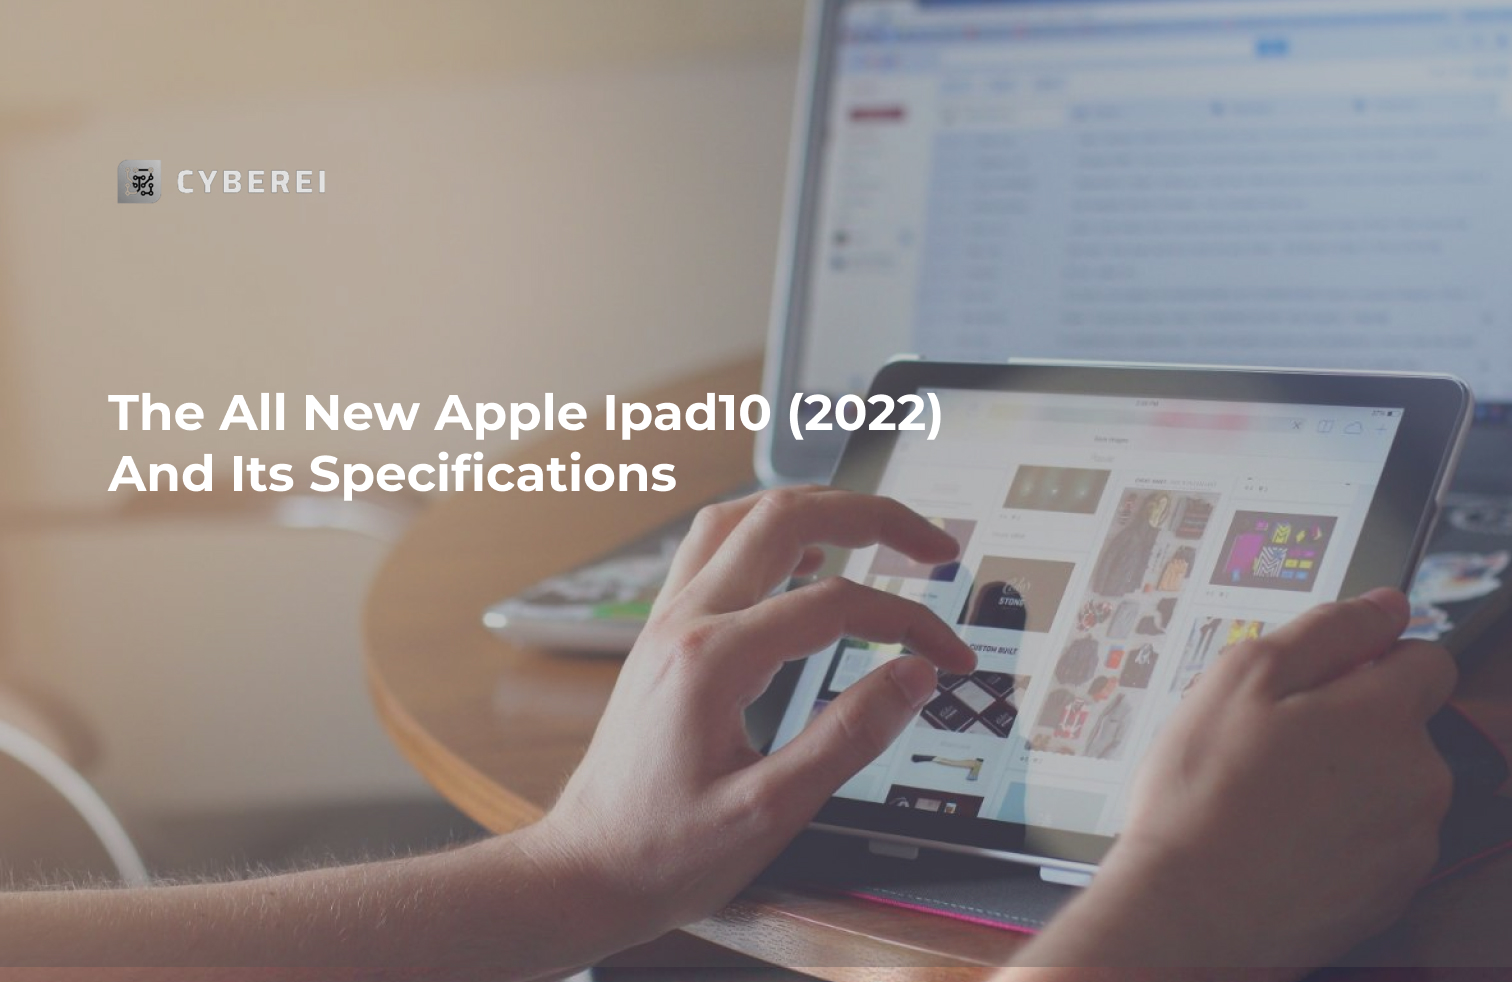 The All New Apple Ipad10 (2022) And Its Specifications